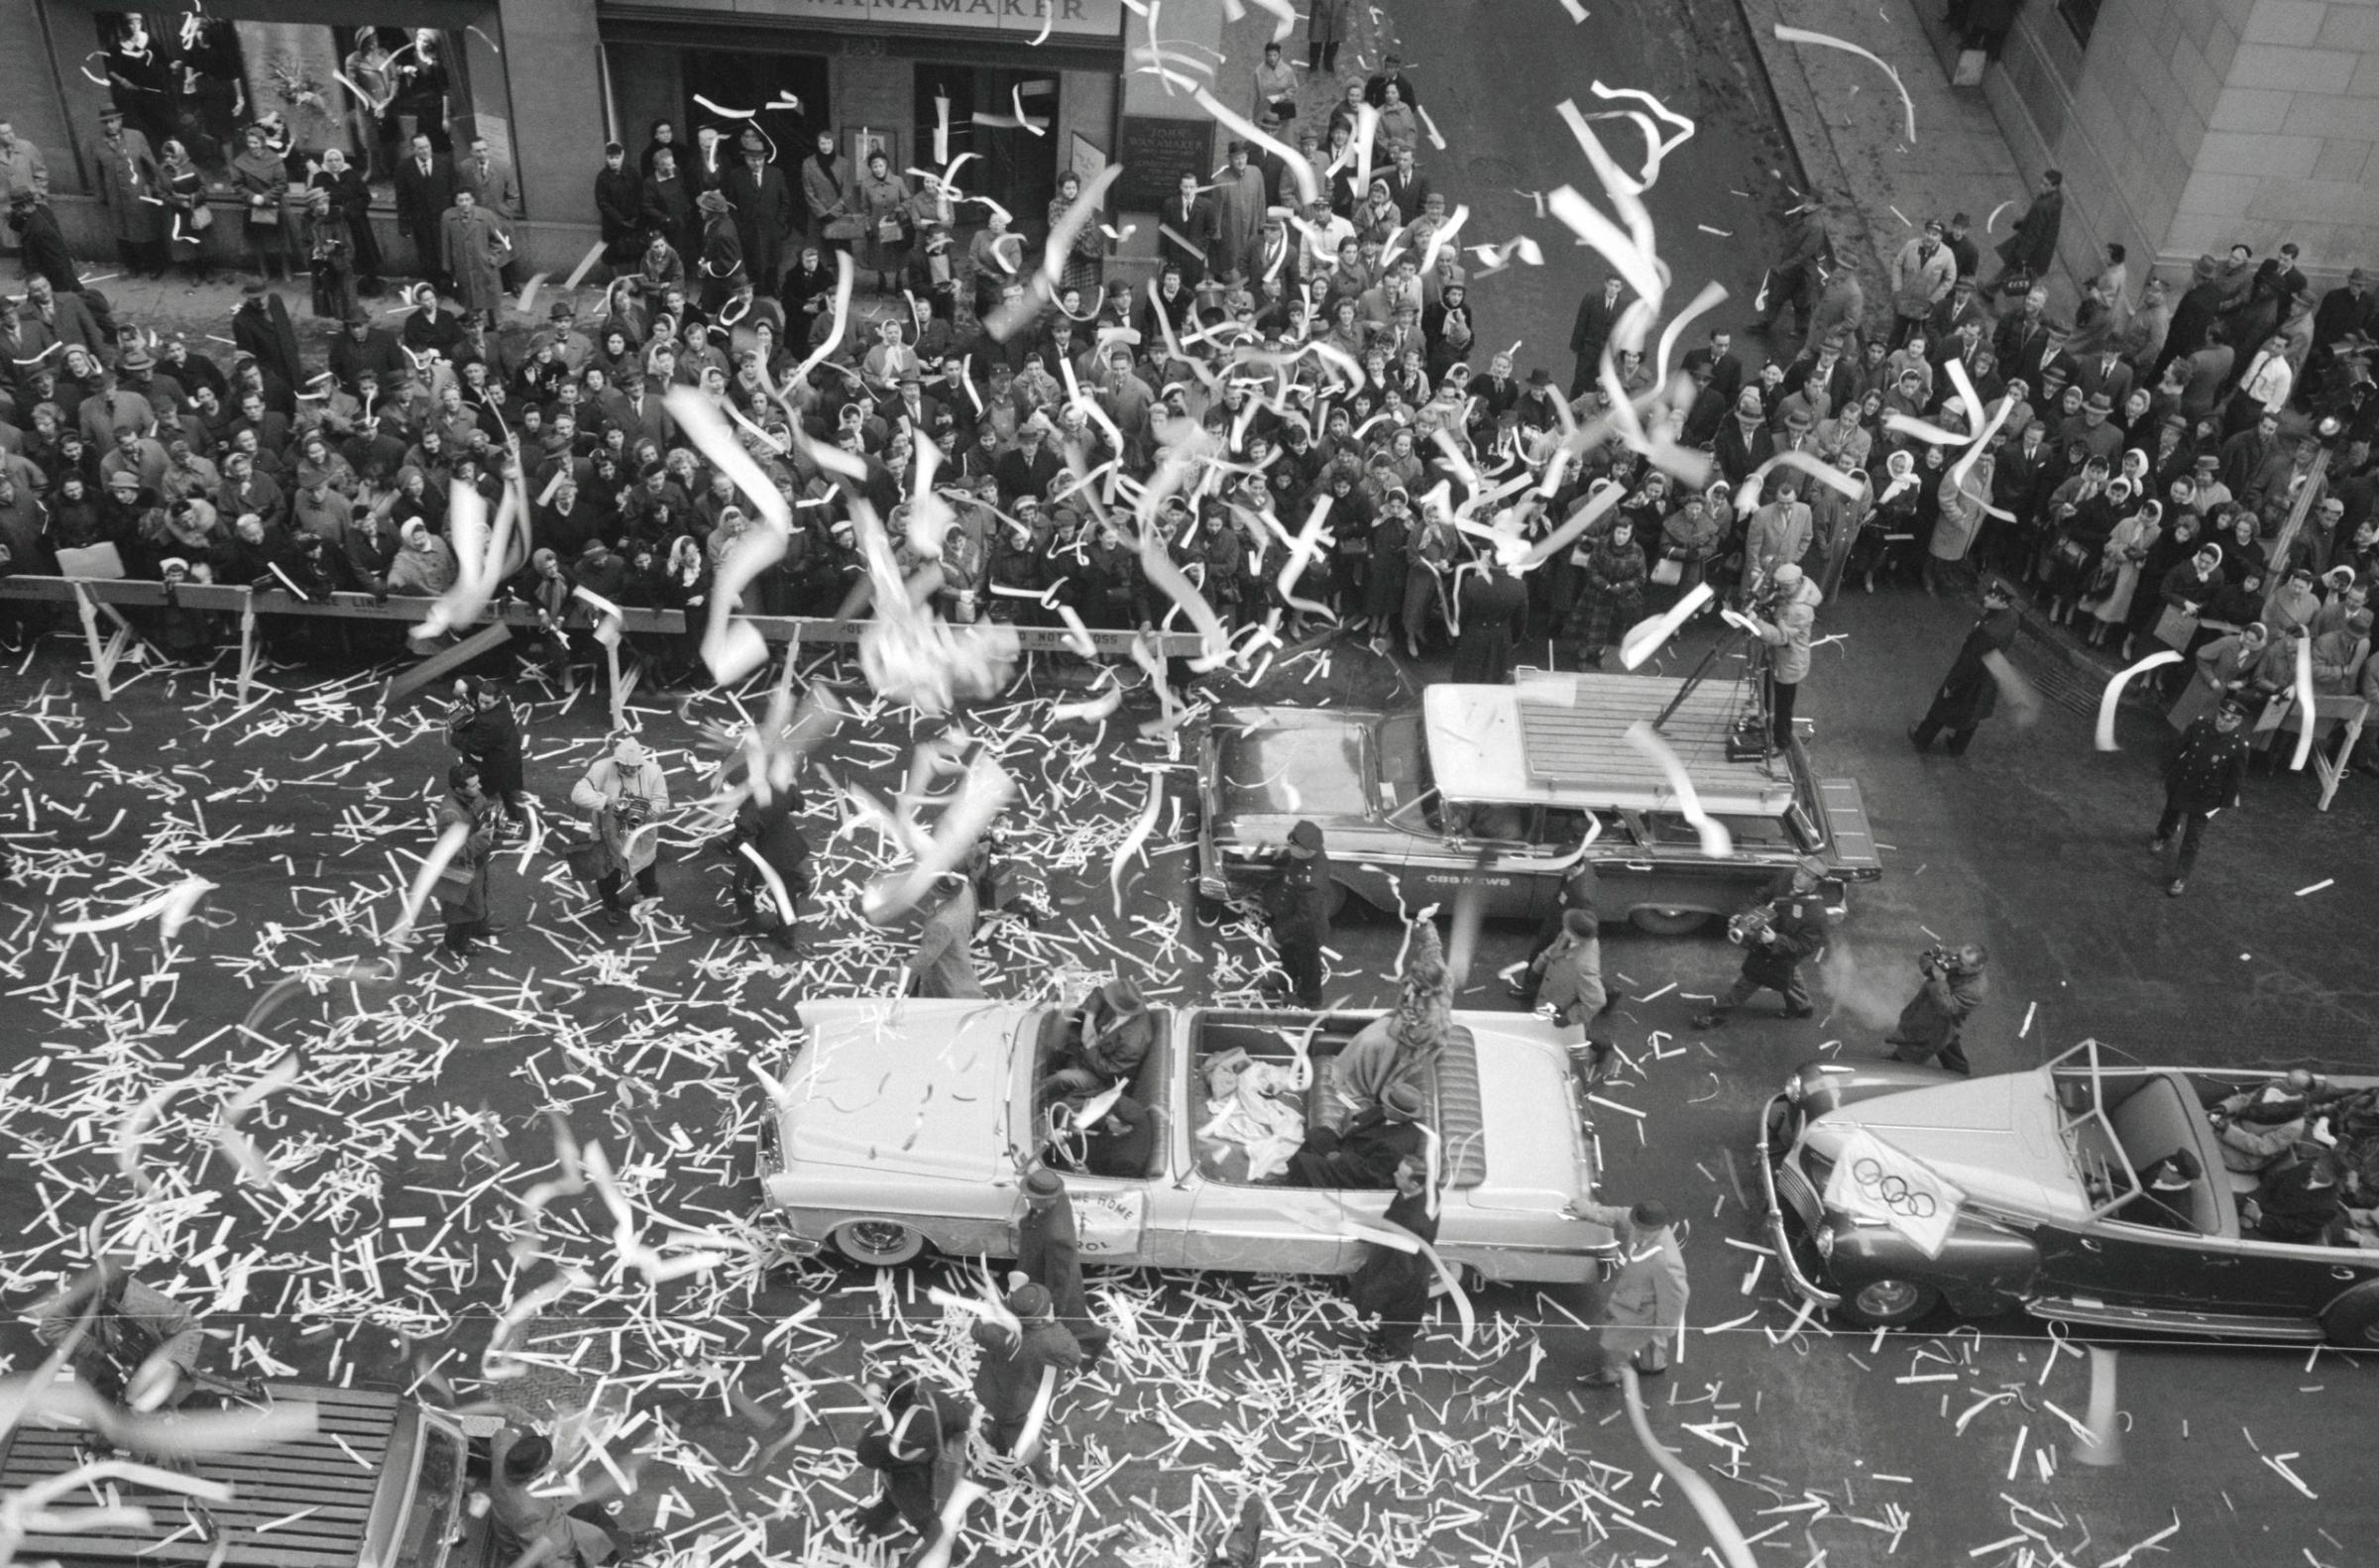 09 Mar 1960 --- Original caption: Ice Queen Honored By Blizzard. New York: Confetti showers down on Carol Heiss, 20 year old ice skating champion, as she rides up lower Broadway during a ticker tape parade given in her honor. Miss Heiss has won her fifth successive World Championship, her fourth successive National Title, and her first Olympics Gold Medal since leaving her home in Ozone Park, Queens, in January. Upon her arrival at City Hall she received another trophy, the Medallion of the City of New York, presented by Mayor Robert Wagner. --- Image by © Bettmann/CORBIS